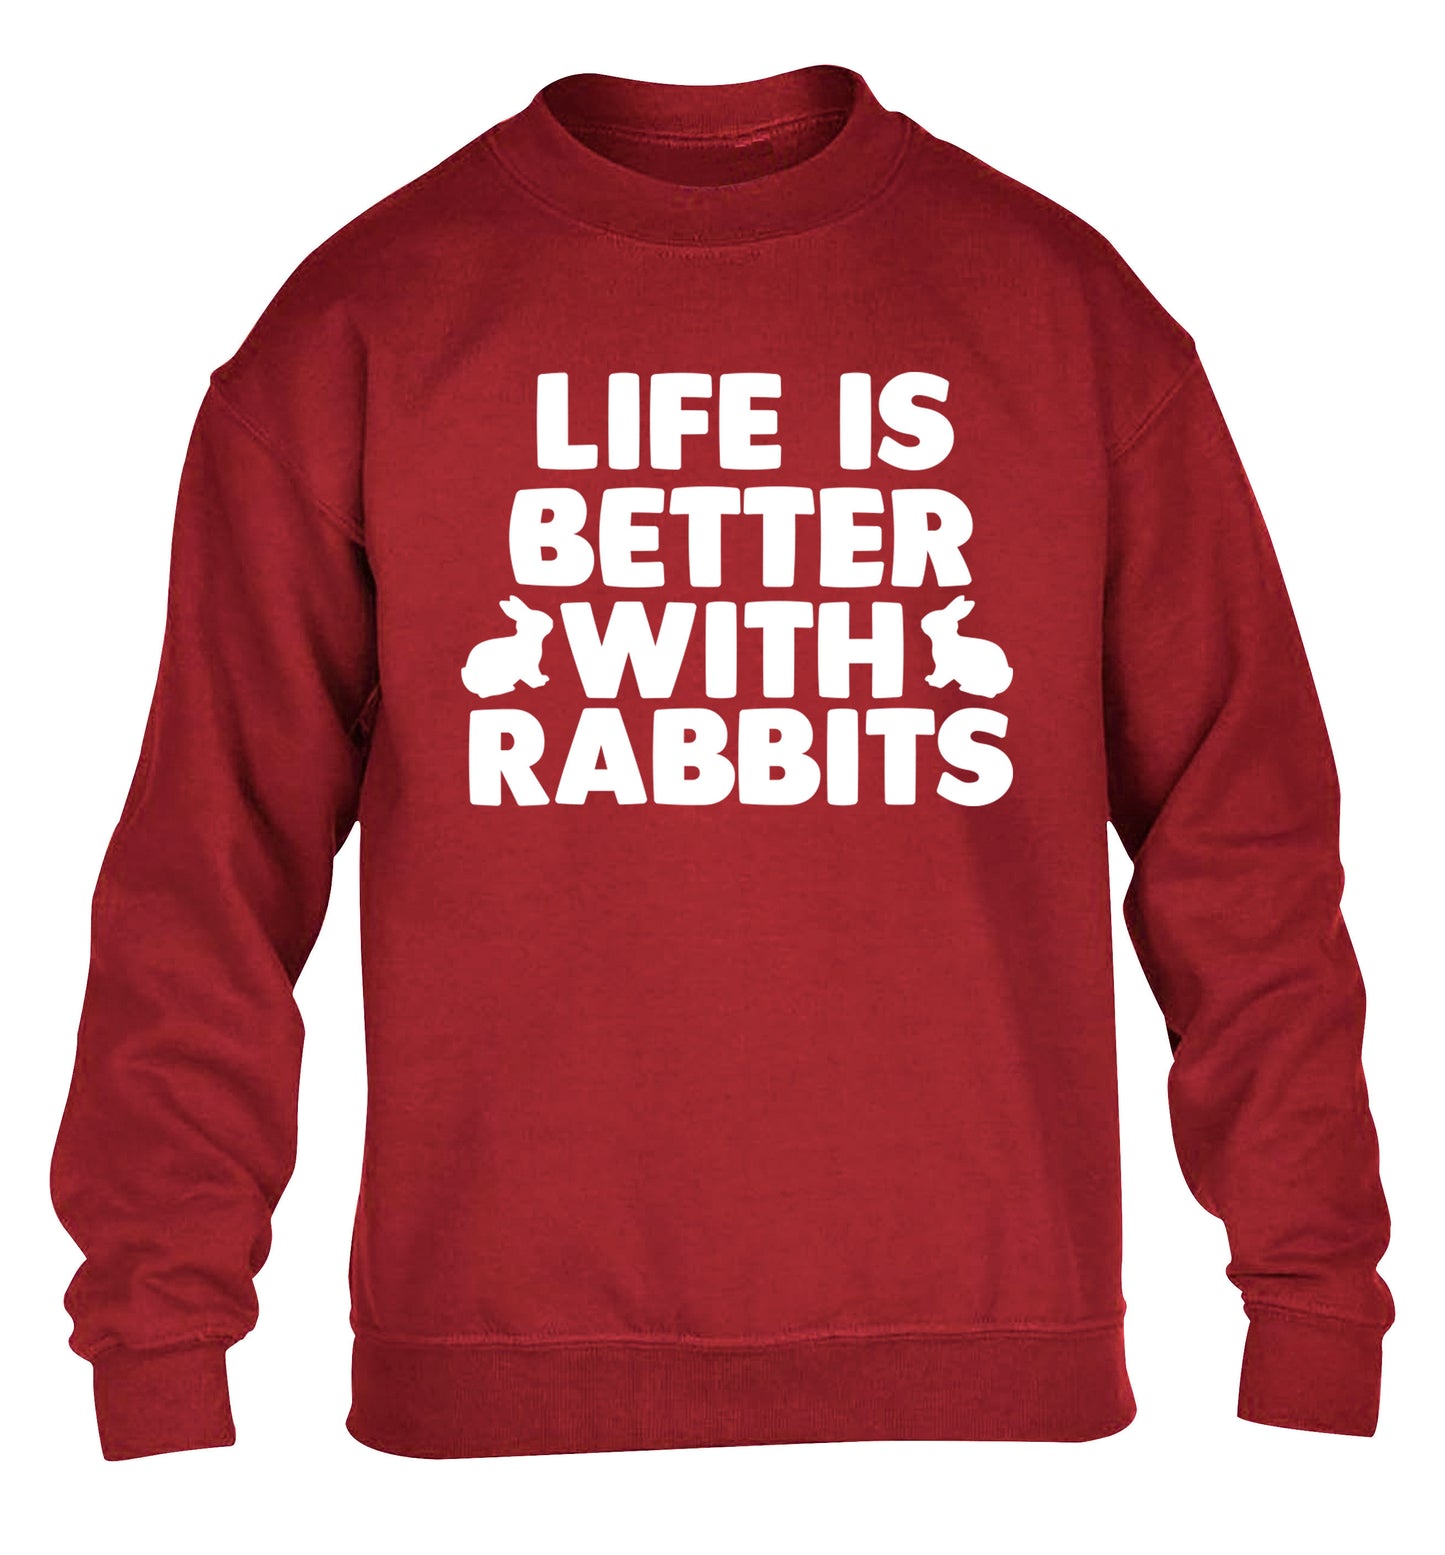 Life is better with rabbits children's grey  sweater 12-14 Years